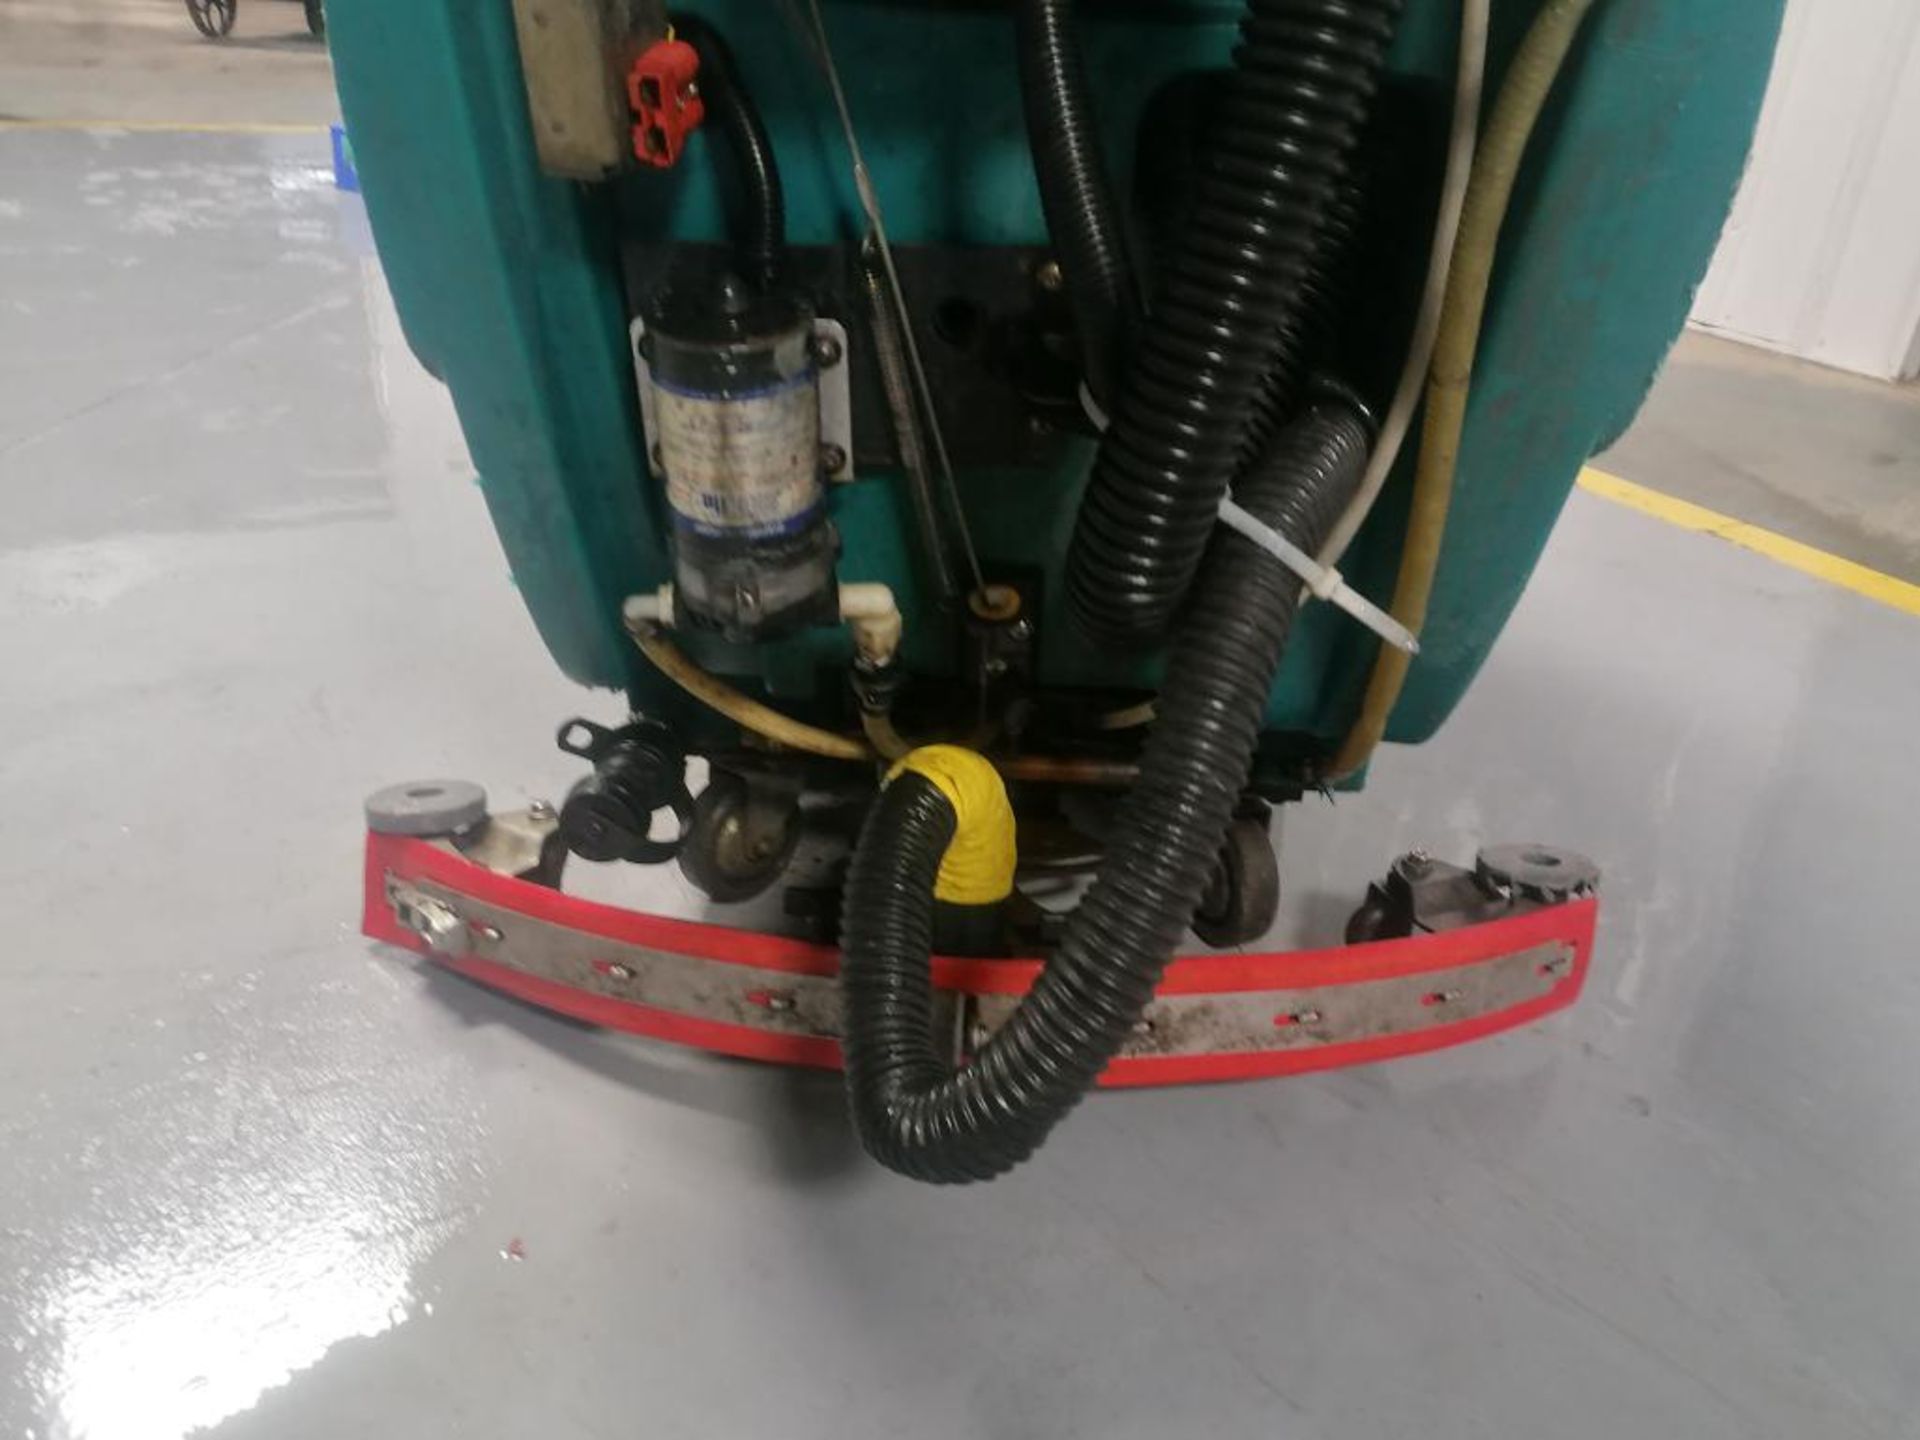 Tennant 5400 Floor Scrubber, Serial #540010167286, 24 V, 972 Hours. Located in Mt. Pleasant, IA. - Image 11 of 19